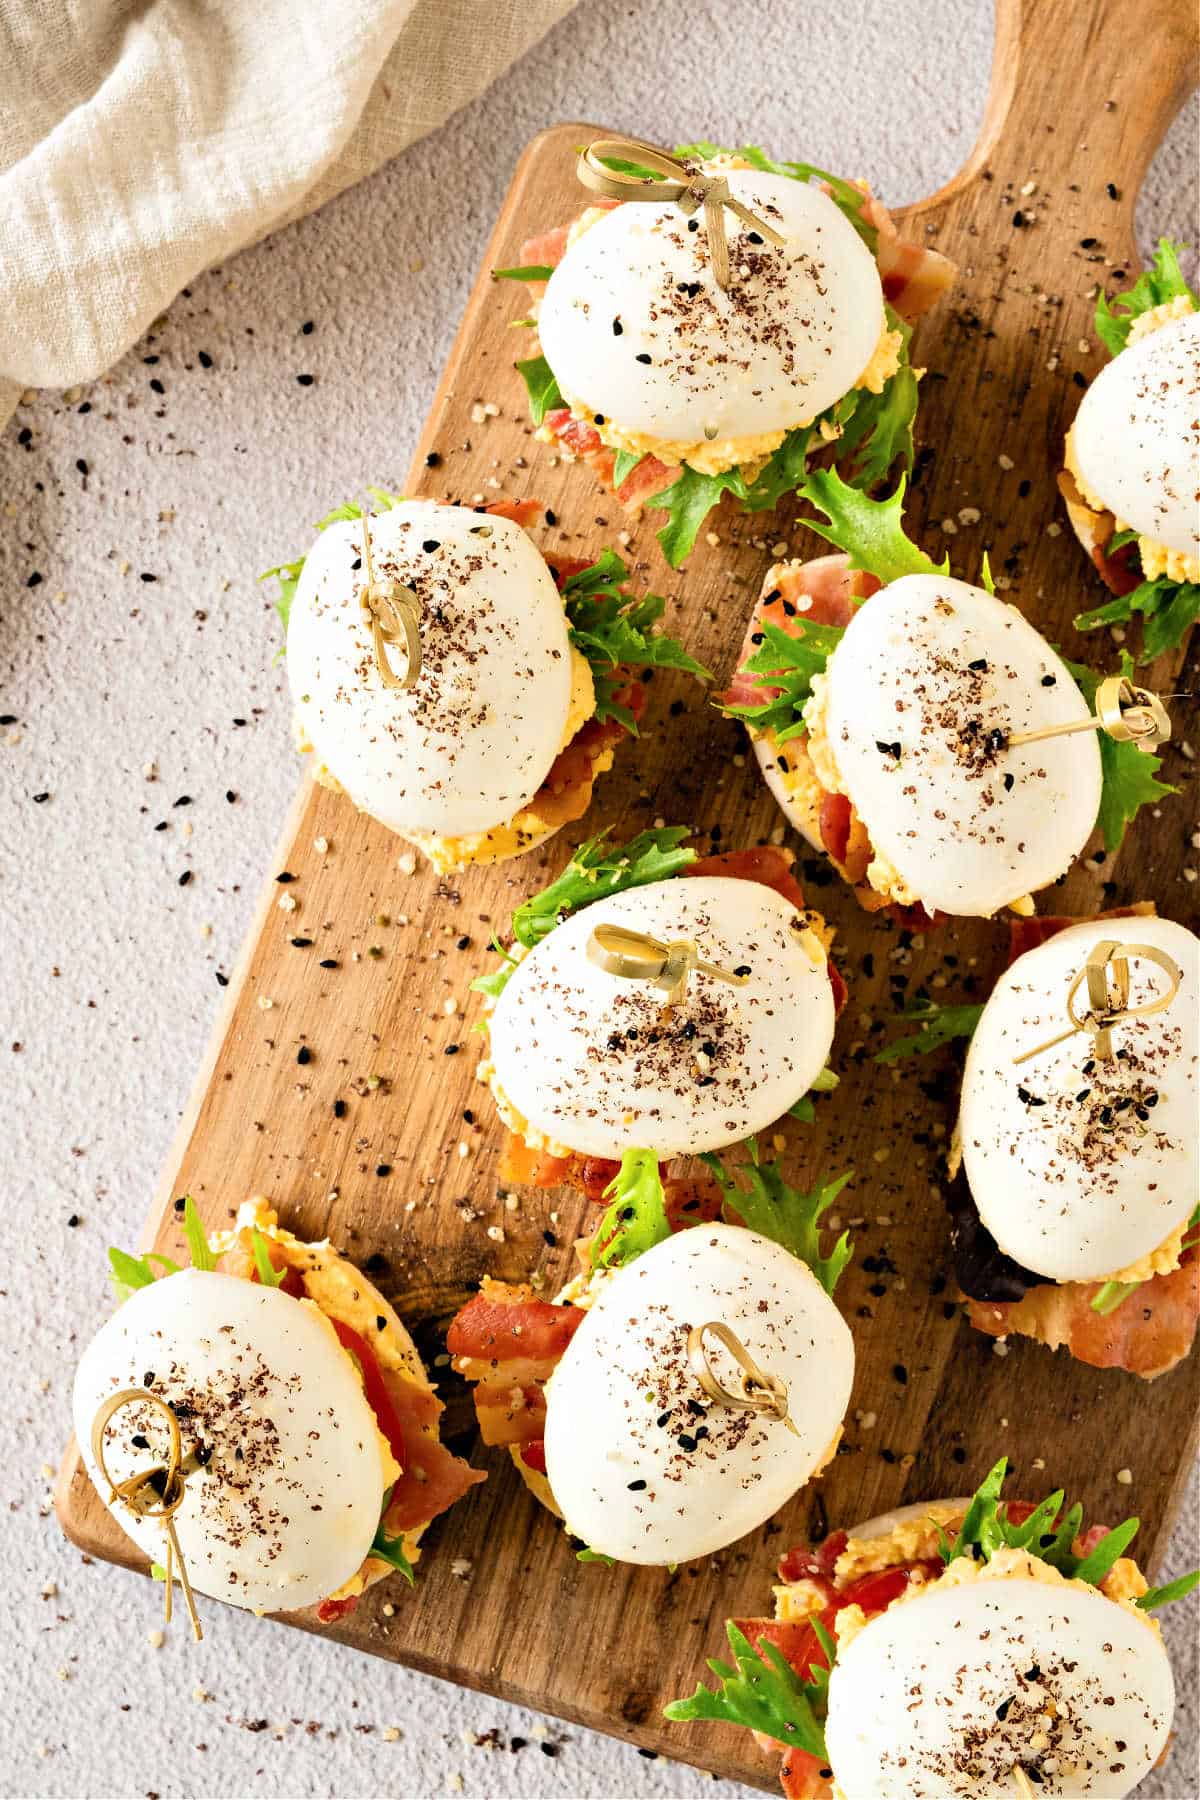 Top view of wooden board with BLT deviled egg sandwiches. Light gray surface.